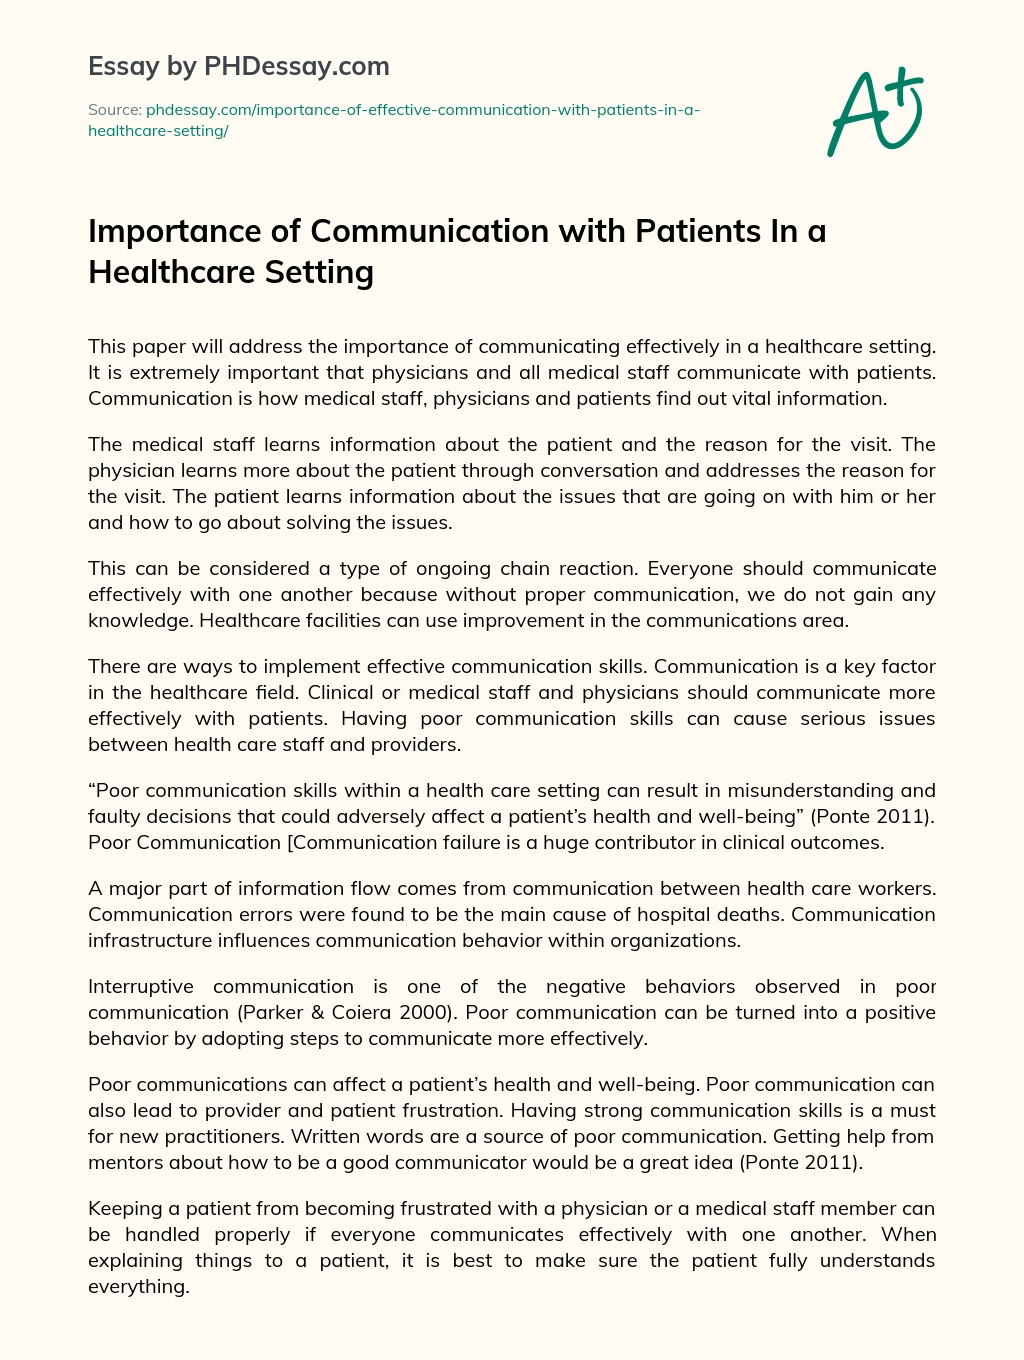 Importance of Communication with Patients In a Healthcare Setting essay